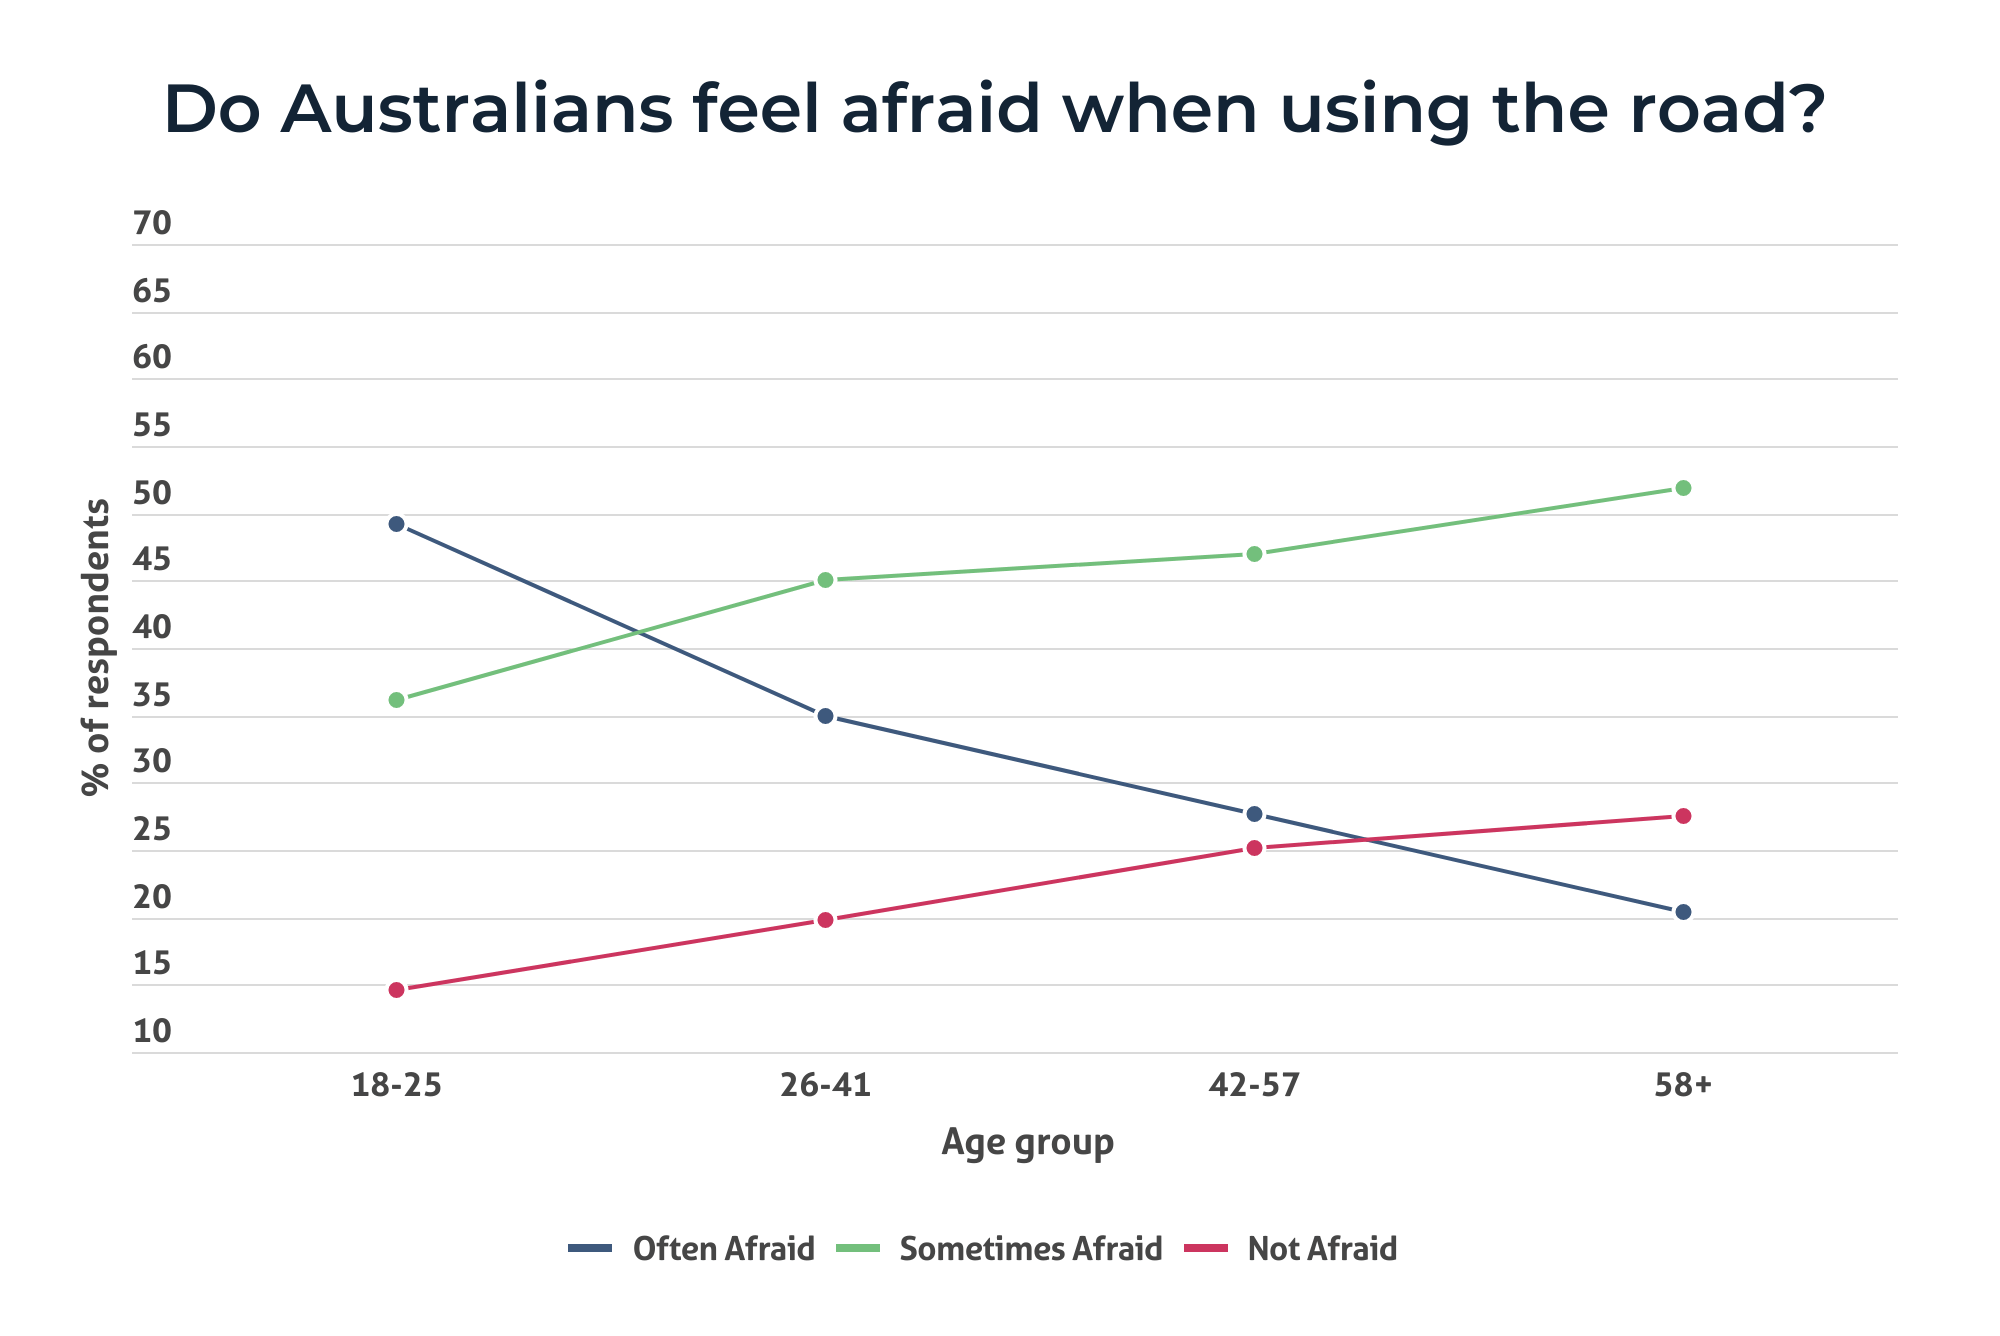 Line chart showing how often Australian road users feel afraid when using the road, by age group